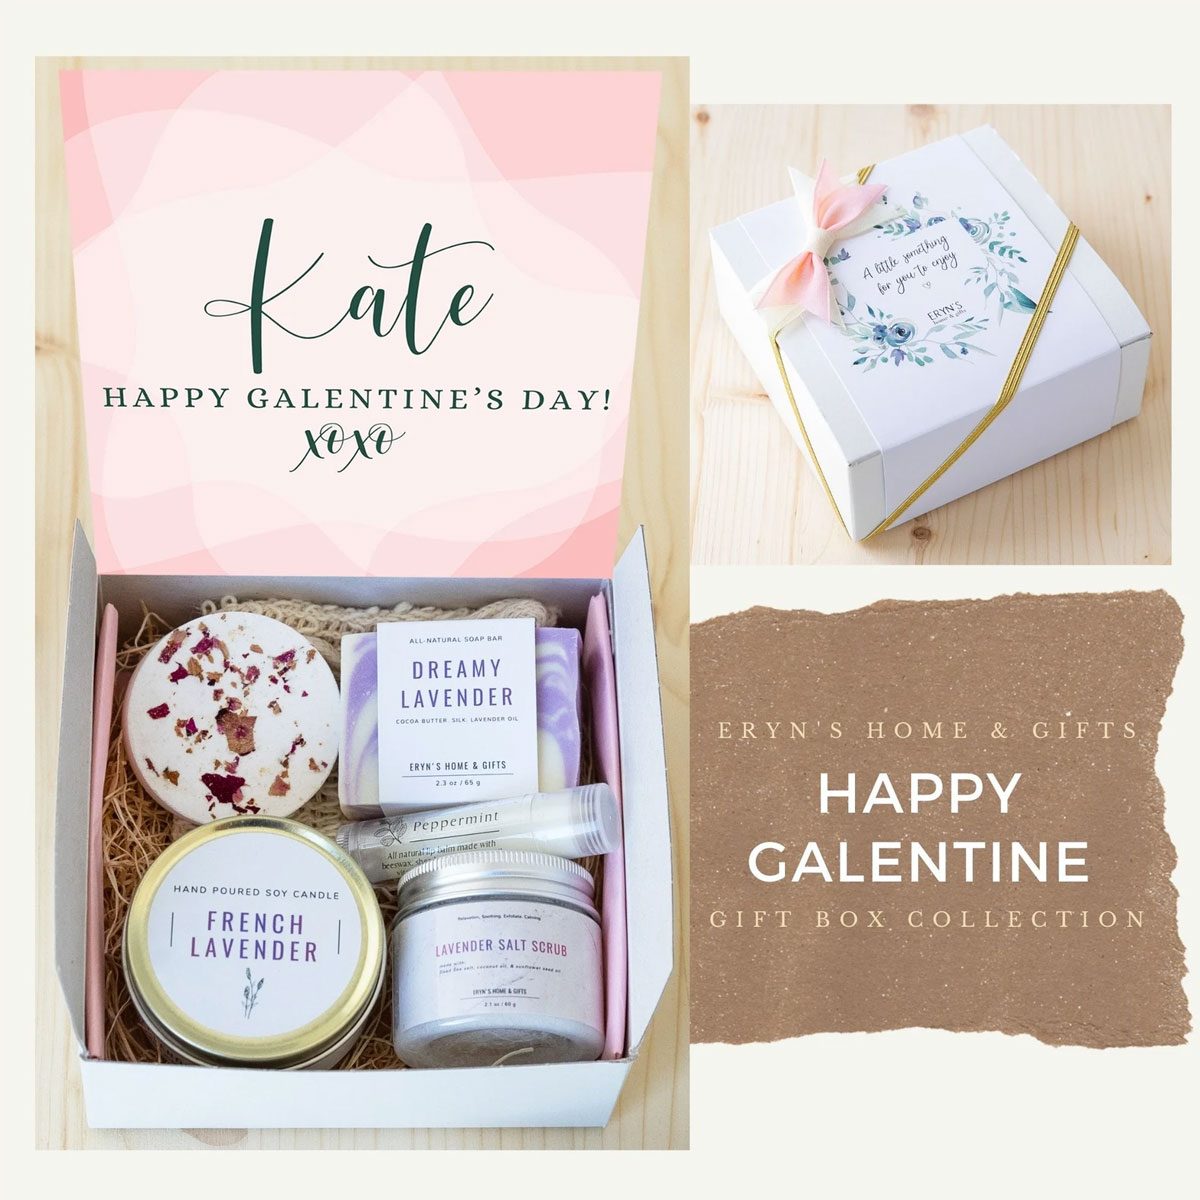 Galentines Day bestie galentine gift,vday candle gift for her gift for best friend vday Ladies Celebrating Ladies Inexpensive Galentine